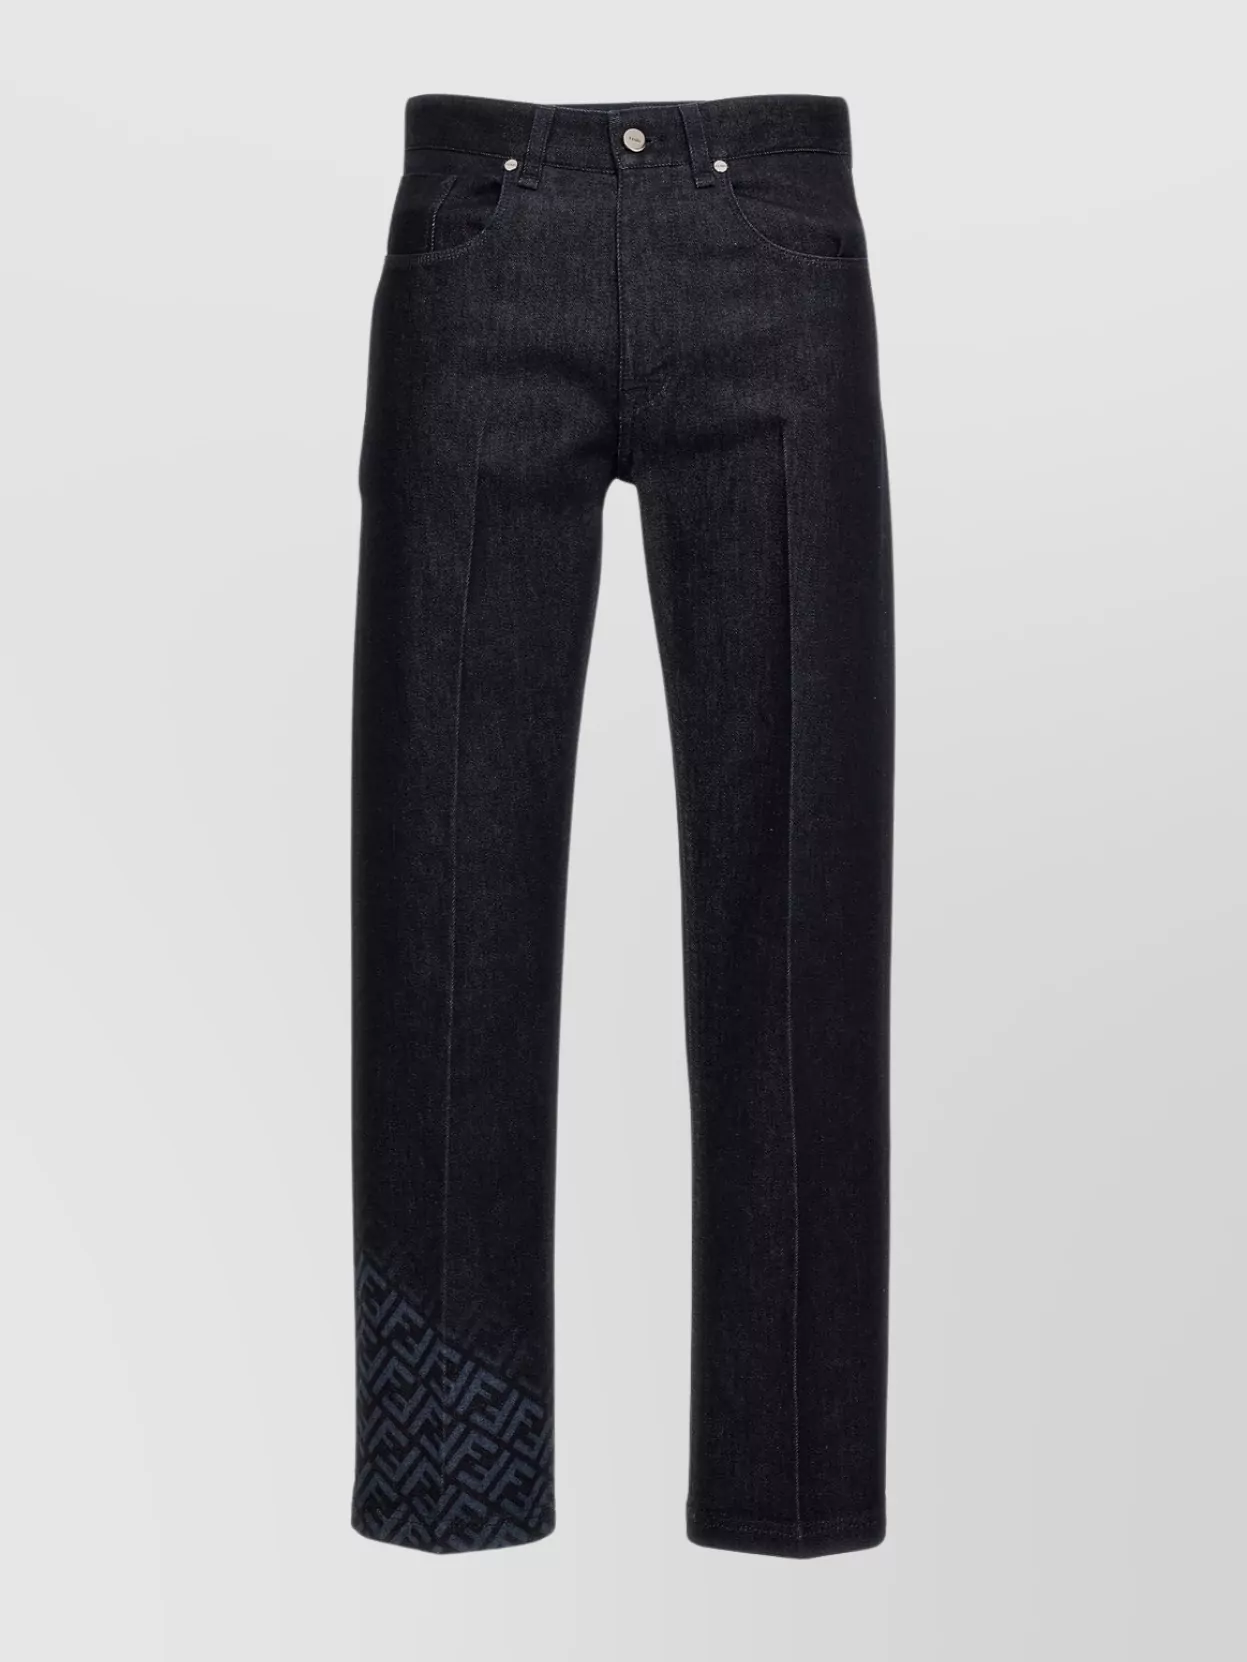 Fendi Denim Trousers With Back Patch Pockets In Black